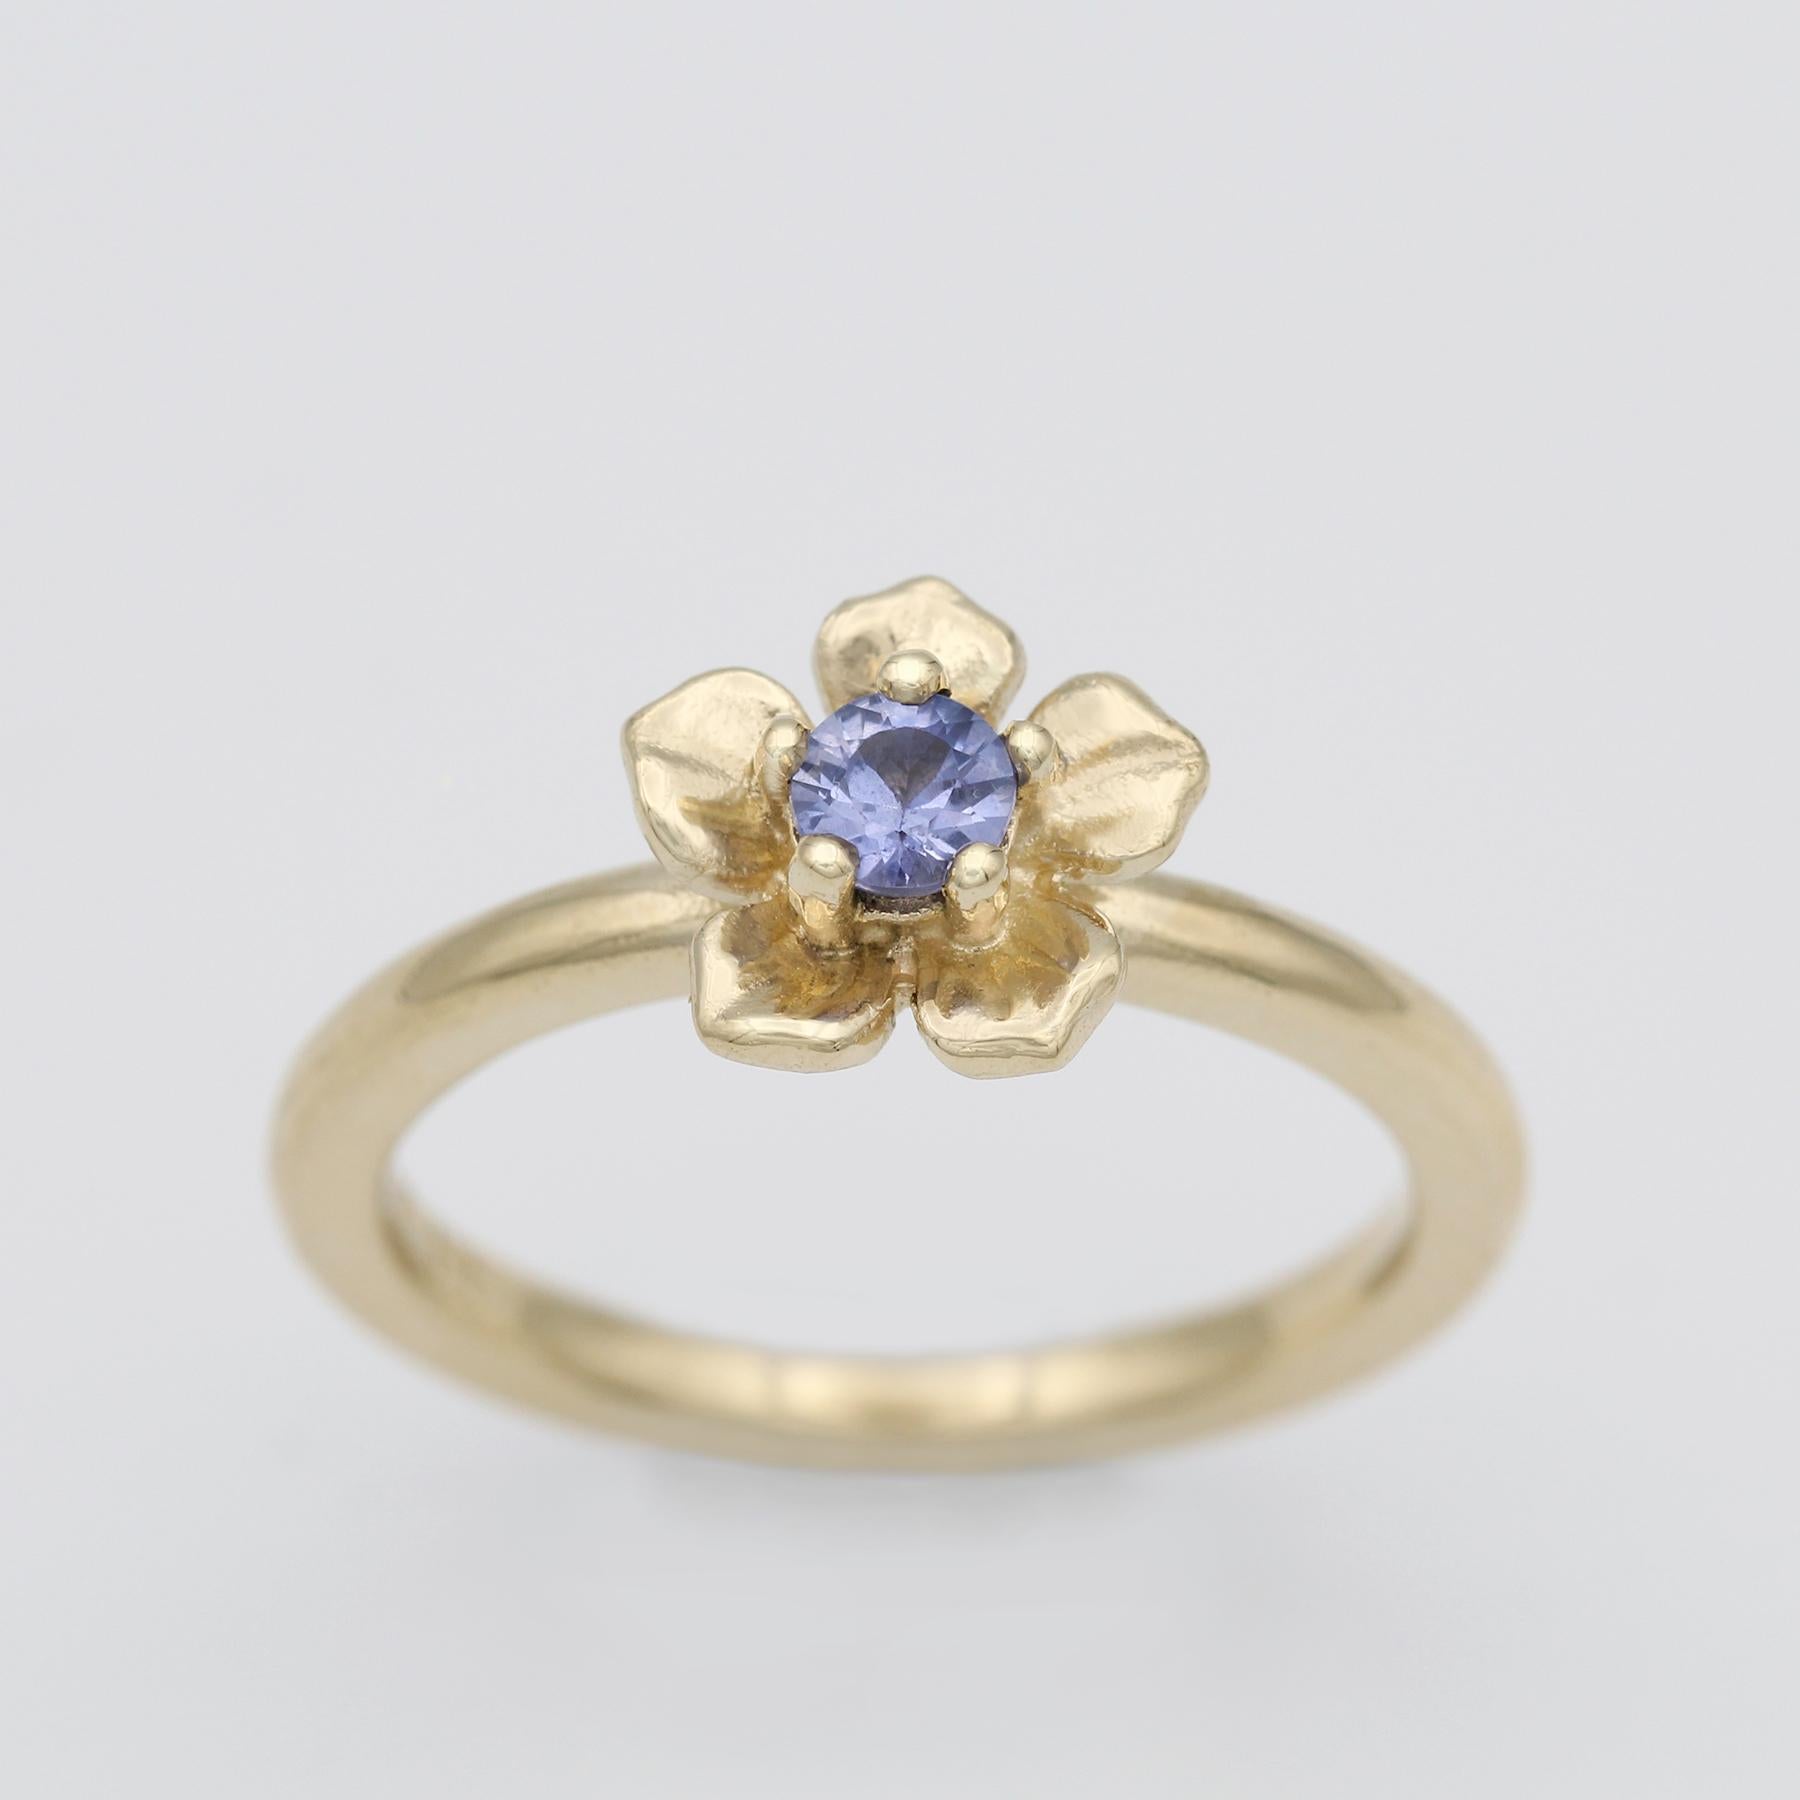 For Sale:  Forget Me Not Ring/ 9ct Yellow Gold, Ceylon Sapphire 4